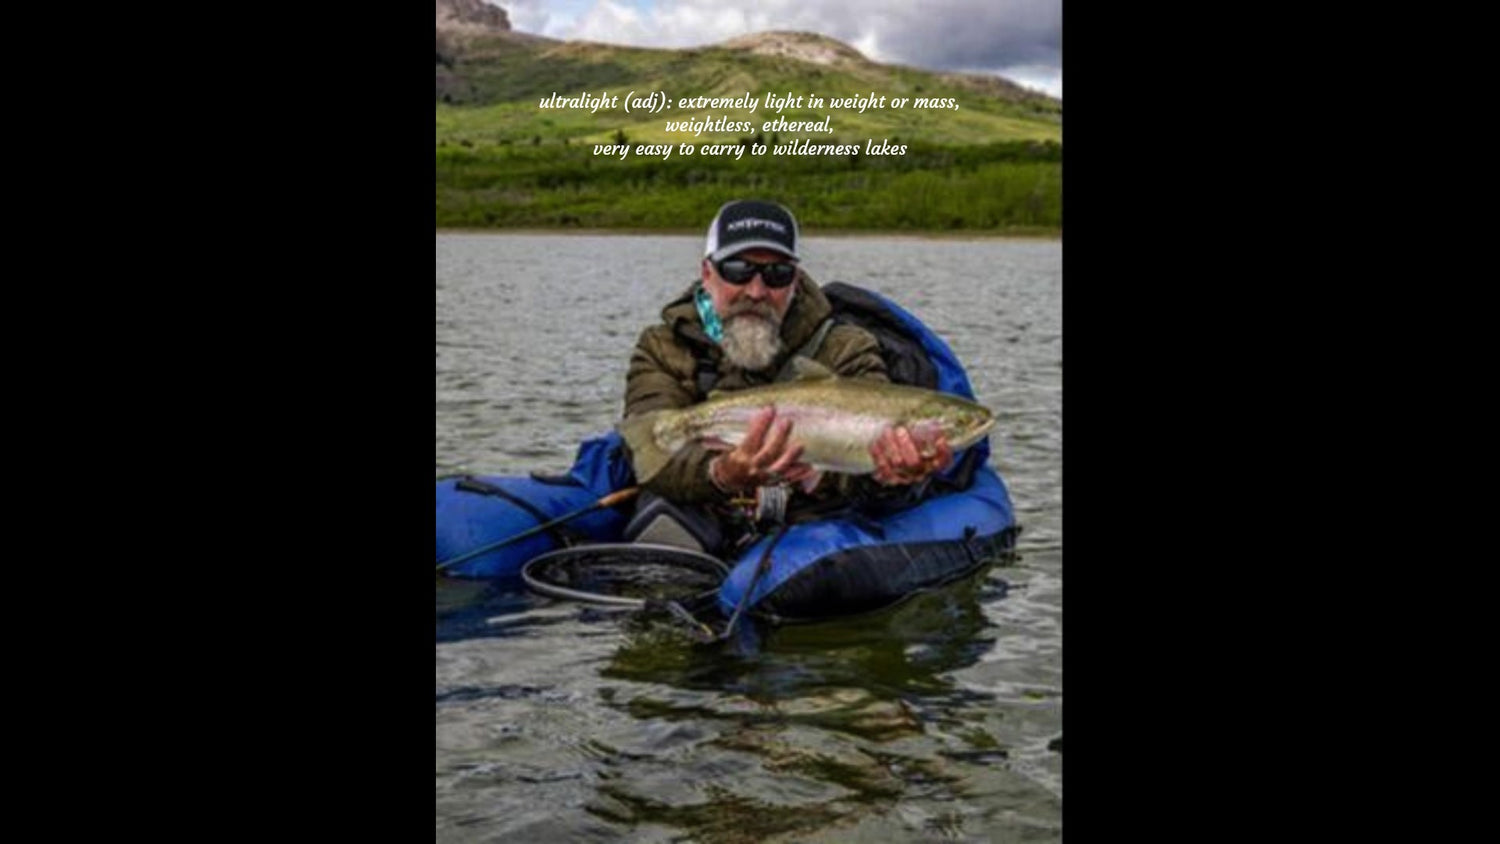 A remarkable trophy rainbow trout was landed by this stillwater fisher as shown in this picture of the Backpacker Pro ultralight float tube on a wilderness lake.